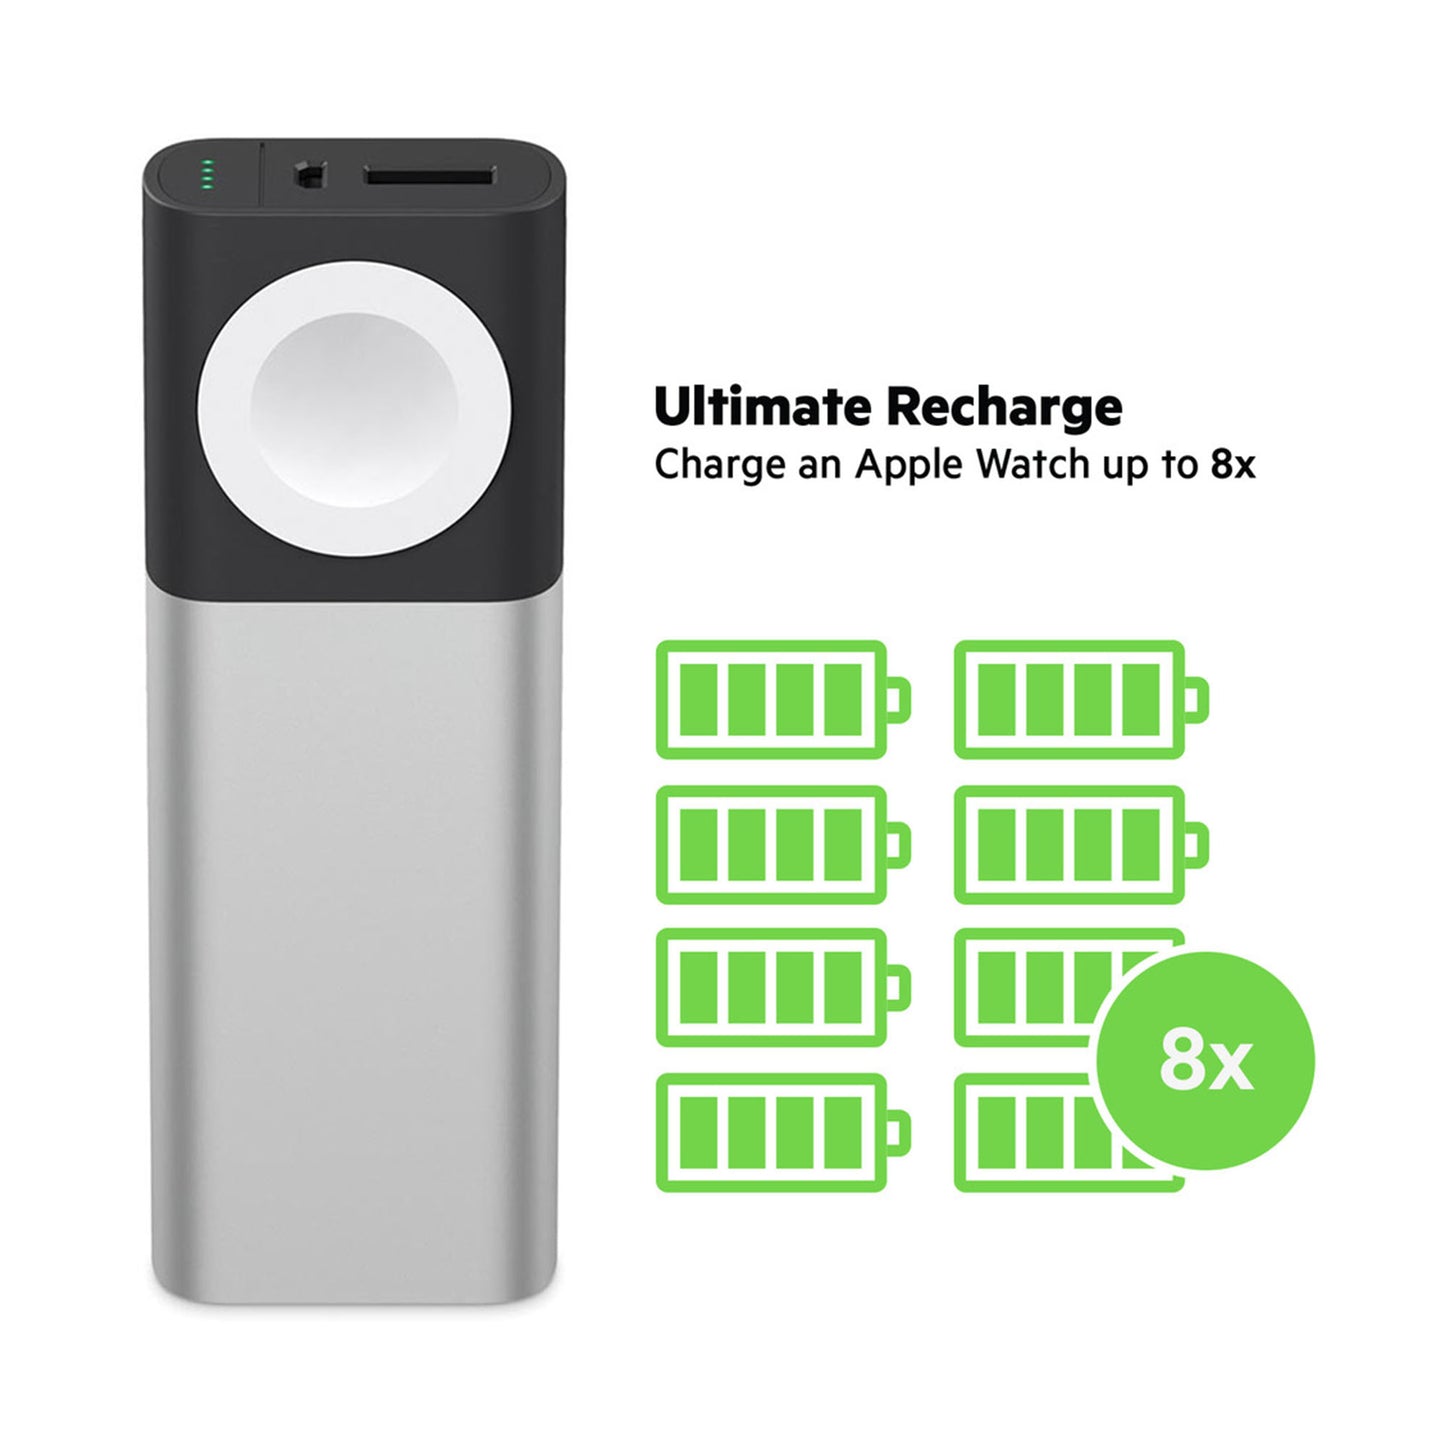 BELKIN Valet Charger Power Pack 6700 mAh for Apple Watch + iPhone - Silver/Gray